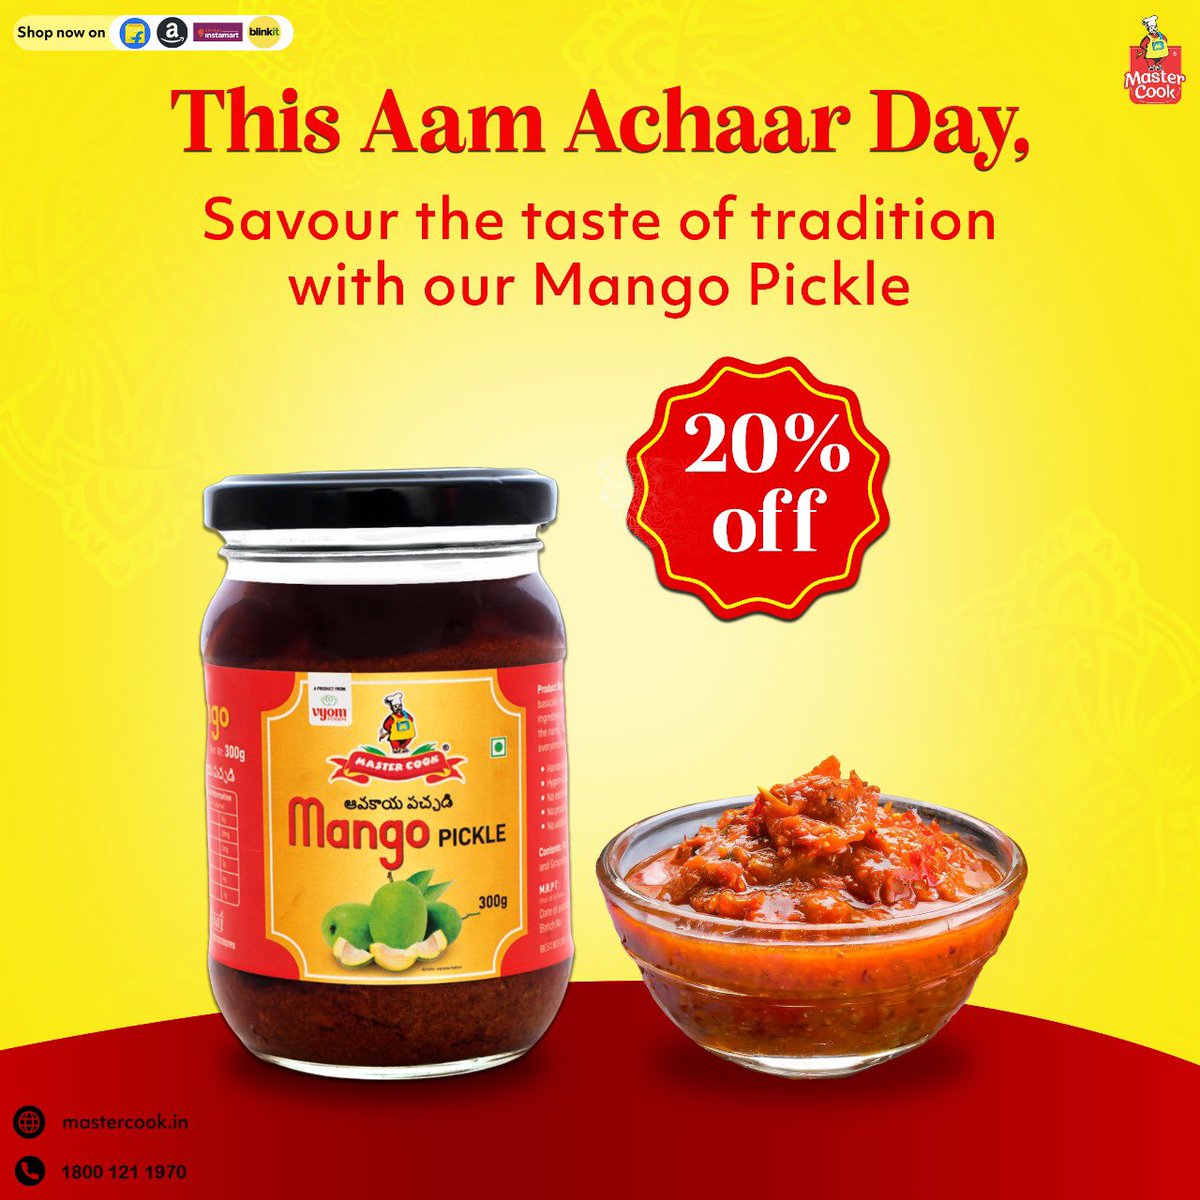 Celebrate Aam Achaar Day with our Tangy Mango Pickle and that too at flat 20% off!**
Check out the link in our bio and buy your pickle now!
#pickles #avakkai #mango #mangopickle #mommade #aamachaarday #food #foodie #foodporn #instafood #homemade #pickle #yummy #delicious #pickle